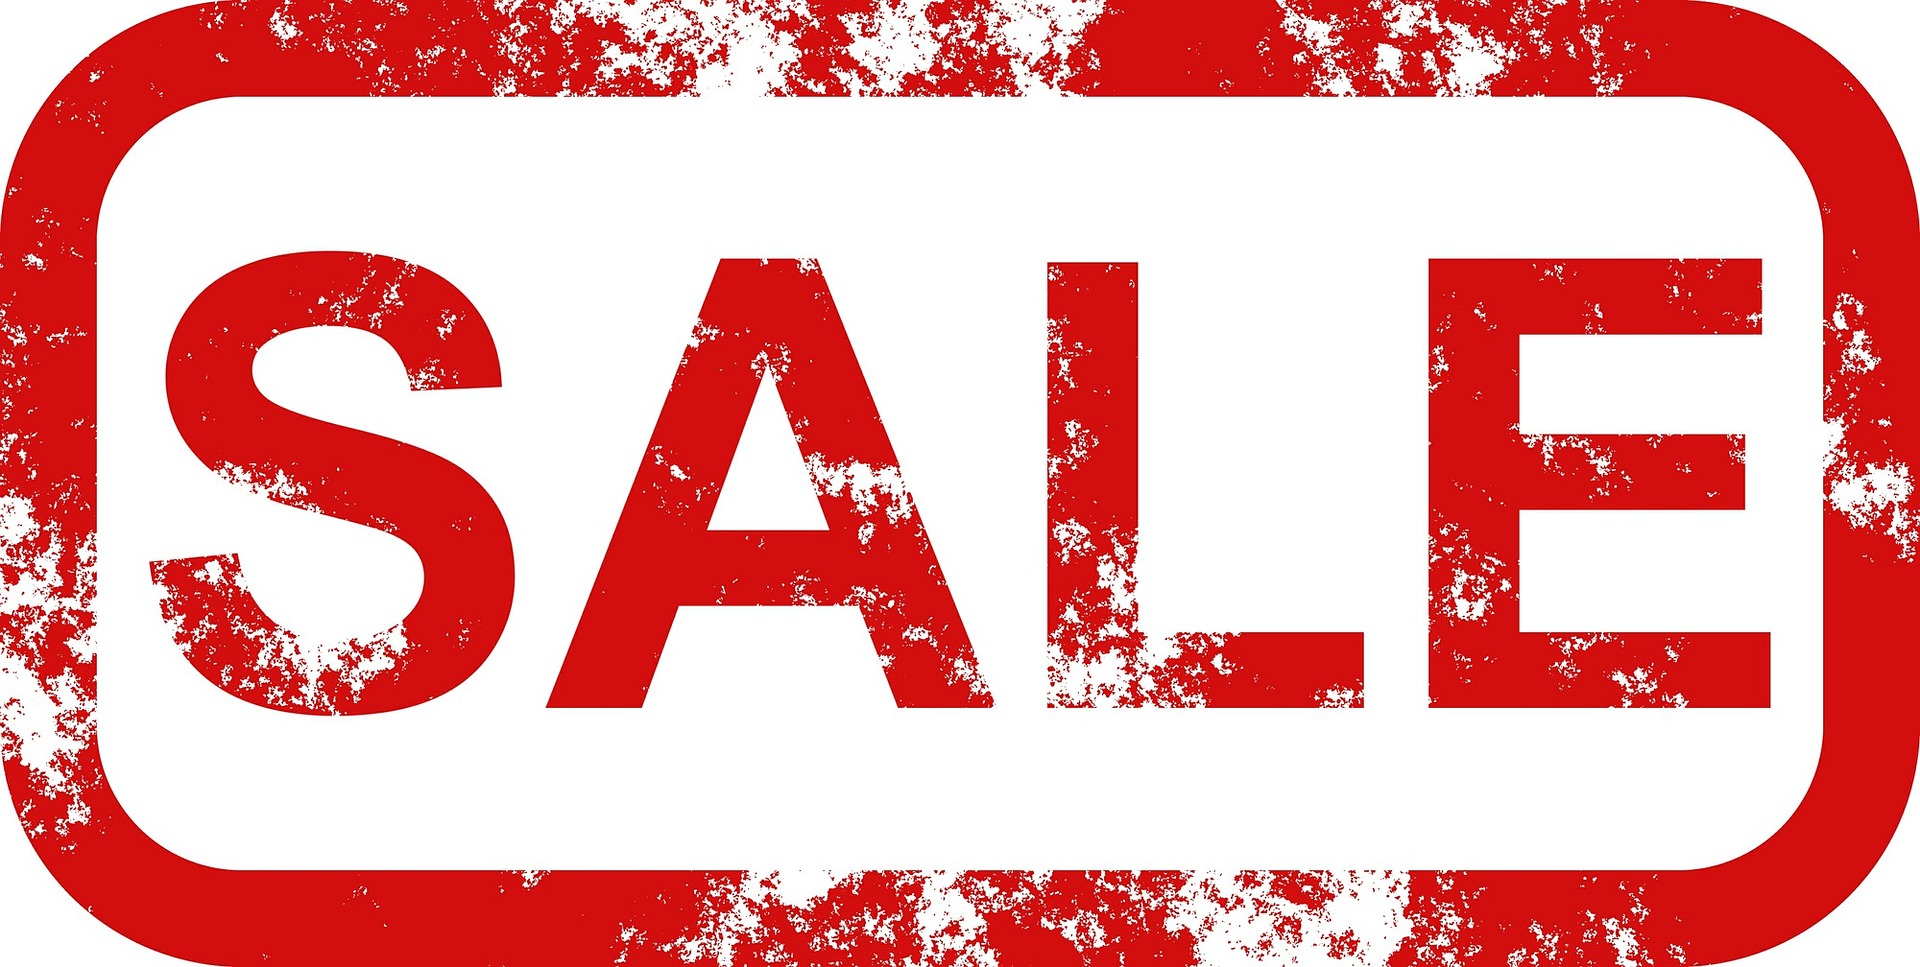 the word "sale" in red letters